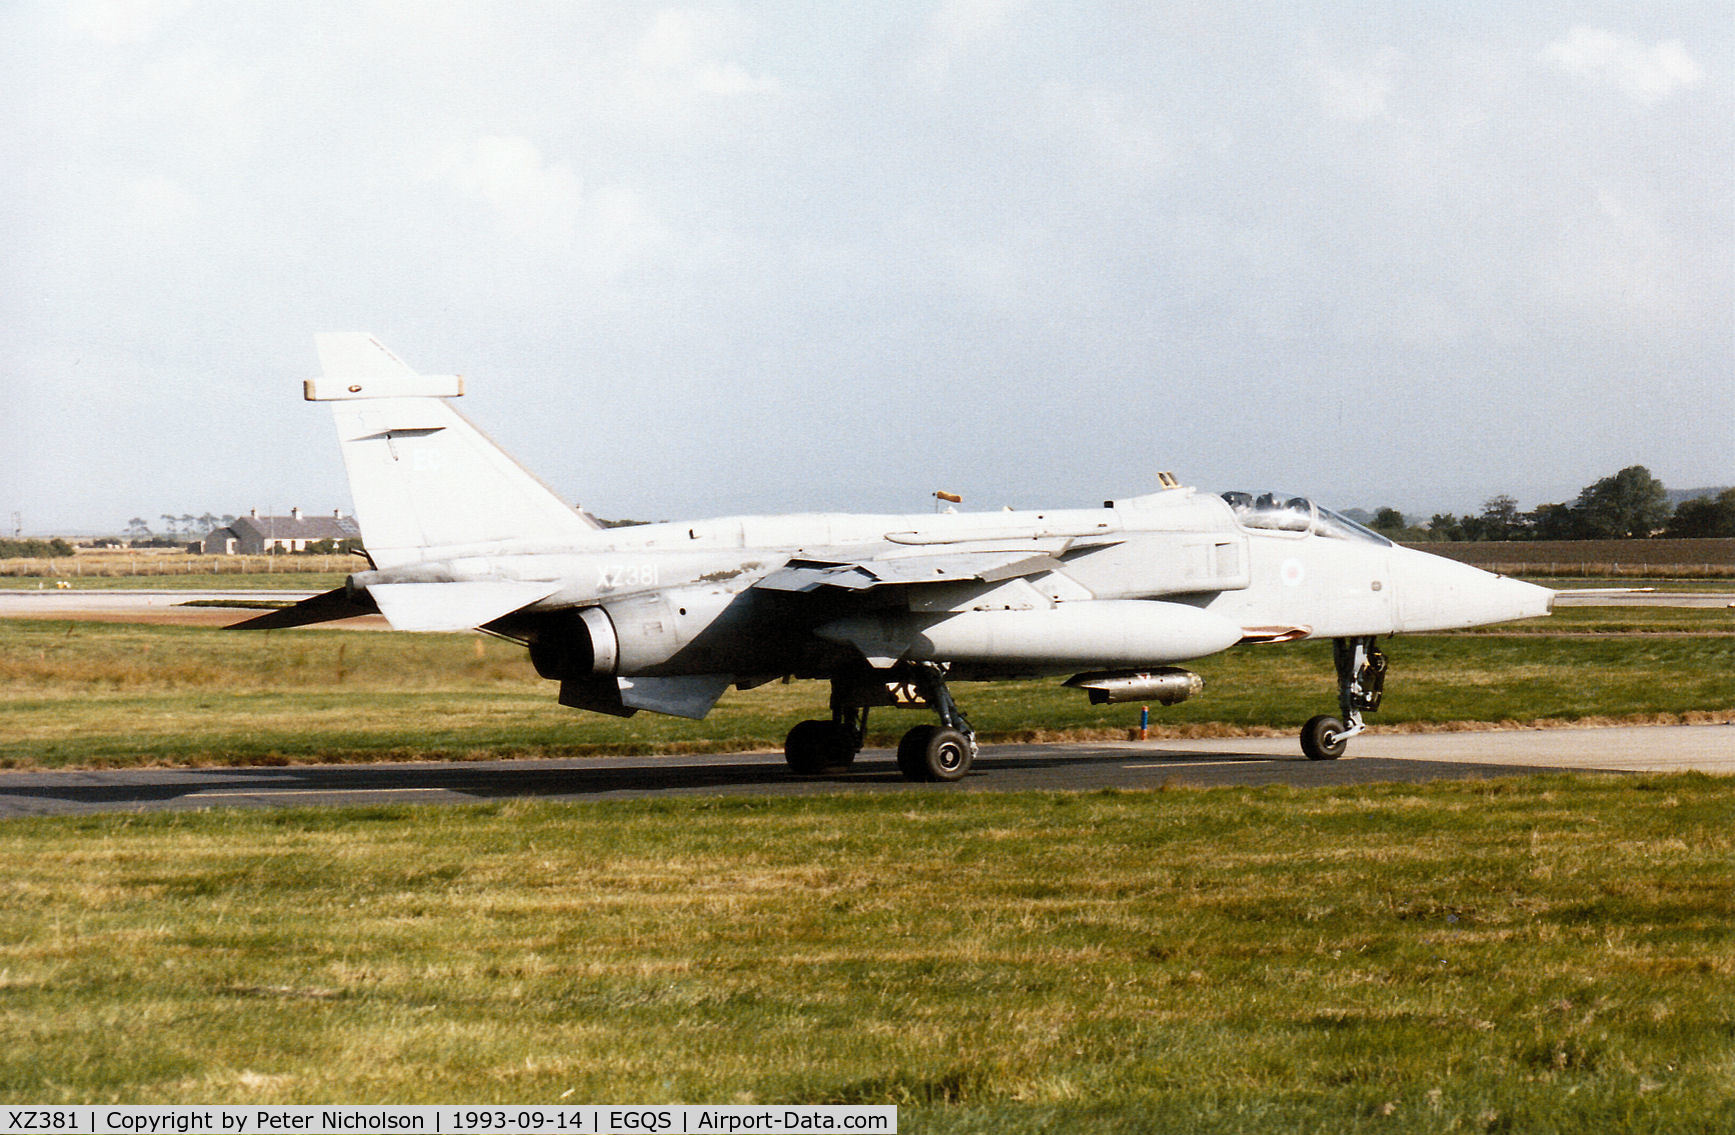 XZ381, 1977 Sepecat Jaguar GR.1A C/N S.146, Jaguar GR.1A of 6 Squadron at RAF Coltishall taxying to Runway 05 at RAF Lossiemouth in September 1993.